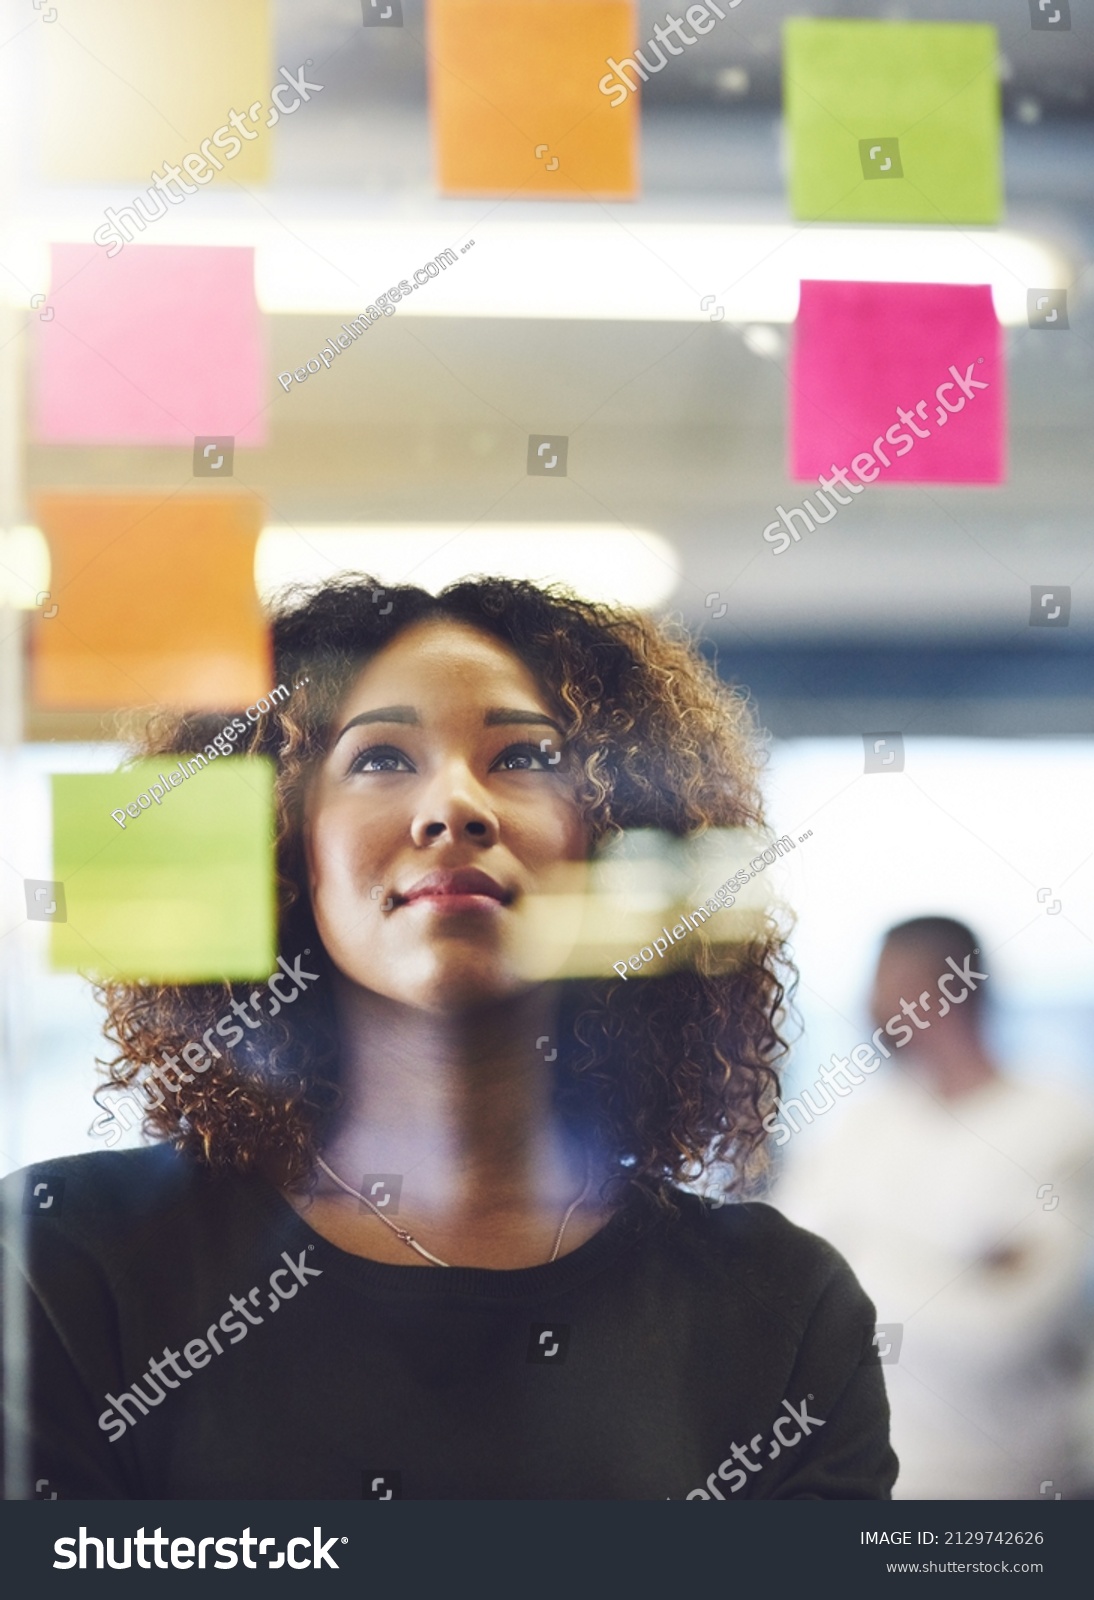 Thinking critically to create success. Shot of a young woman having a brainstorming session with sticky notes at work. #2129742626